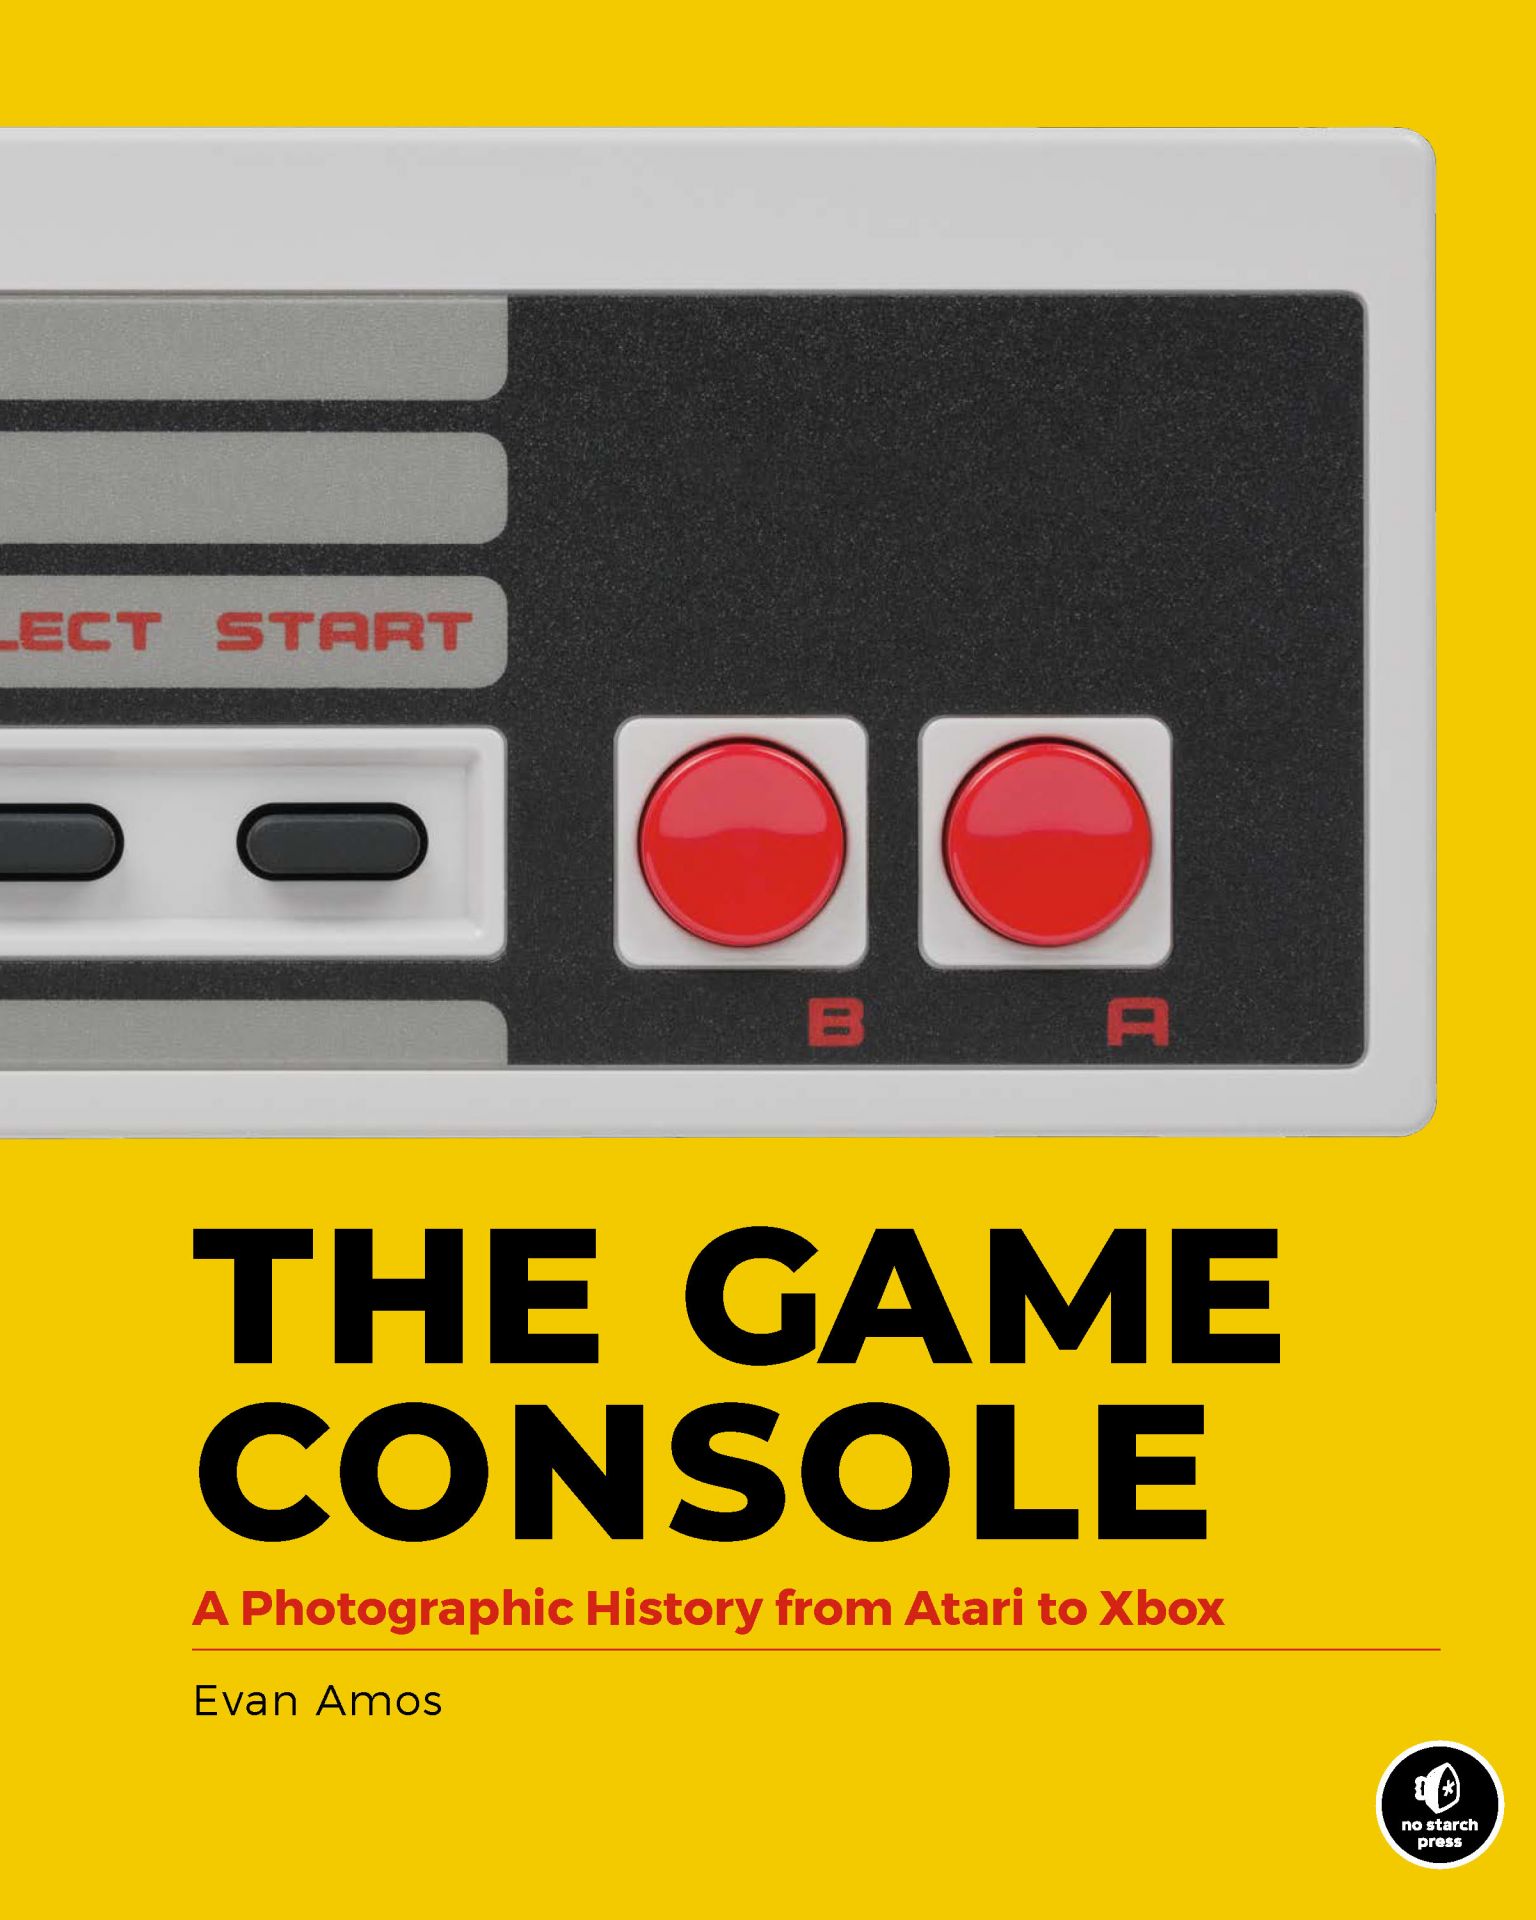 The game console a photographic history from Atari to Xbox - photo 1